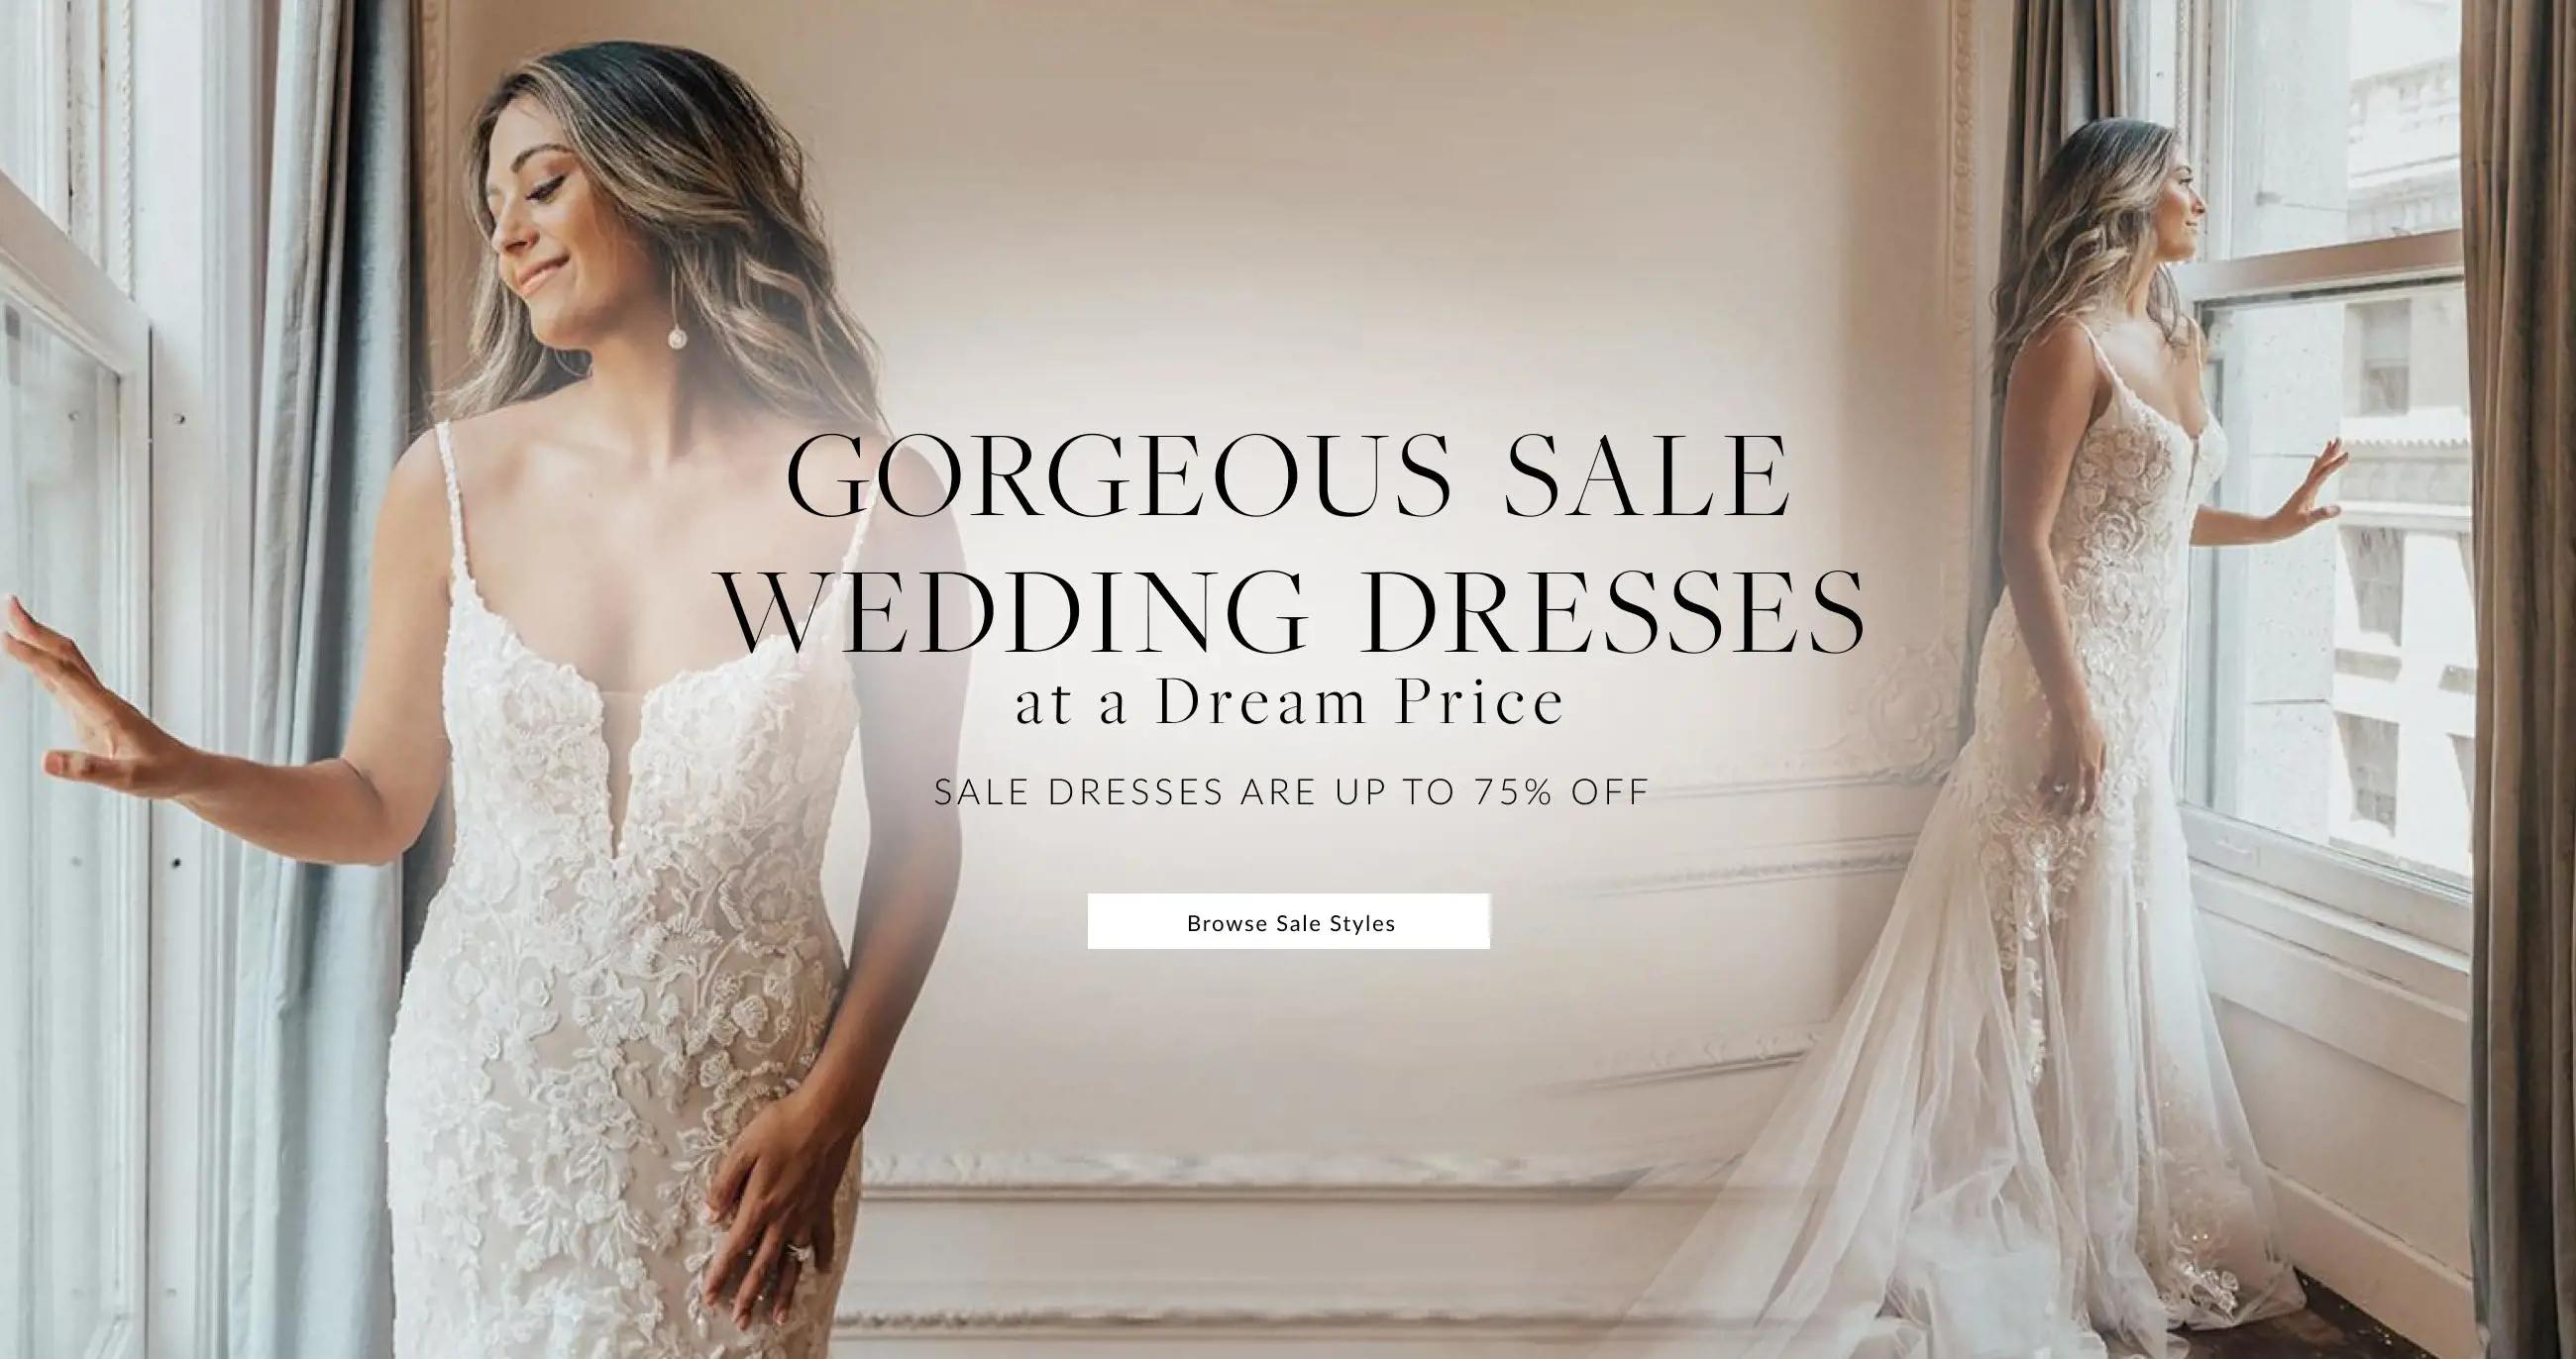 Gorgeous Sale Wedding Dresses at a Dream Price at Isabella Grace in UK